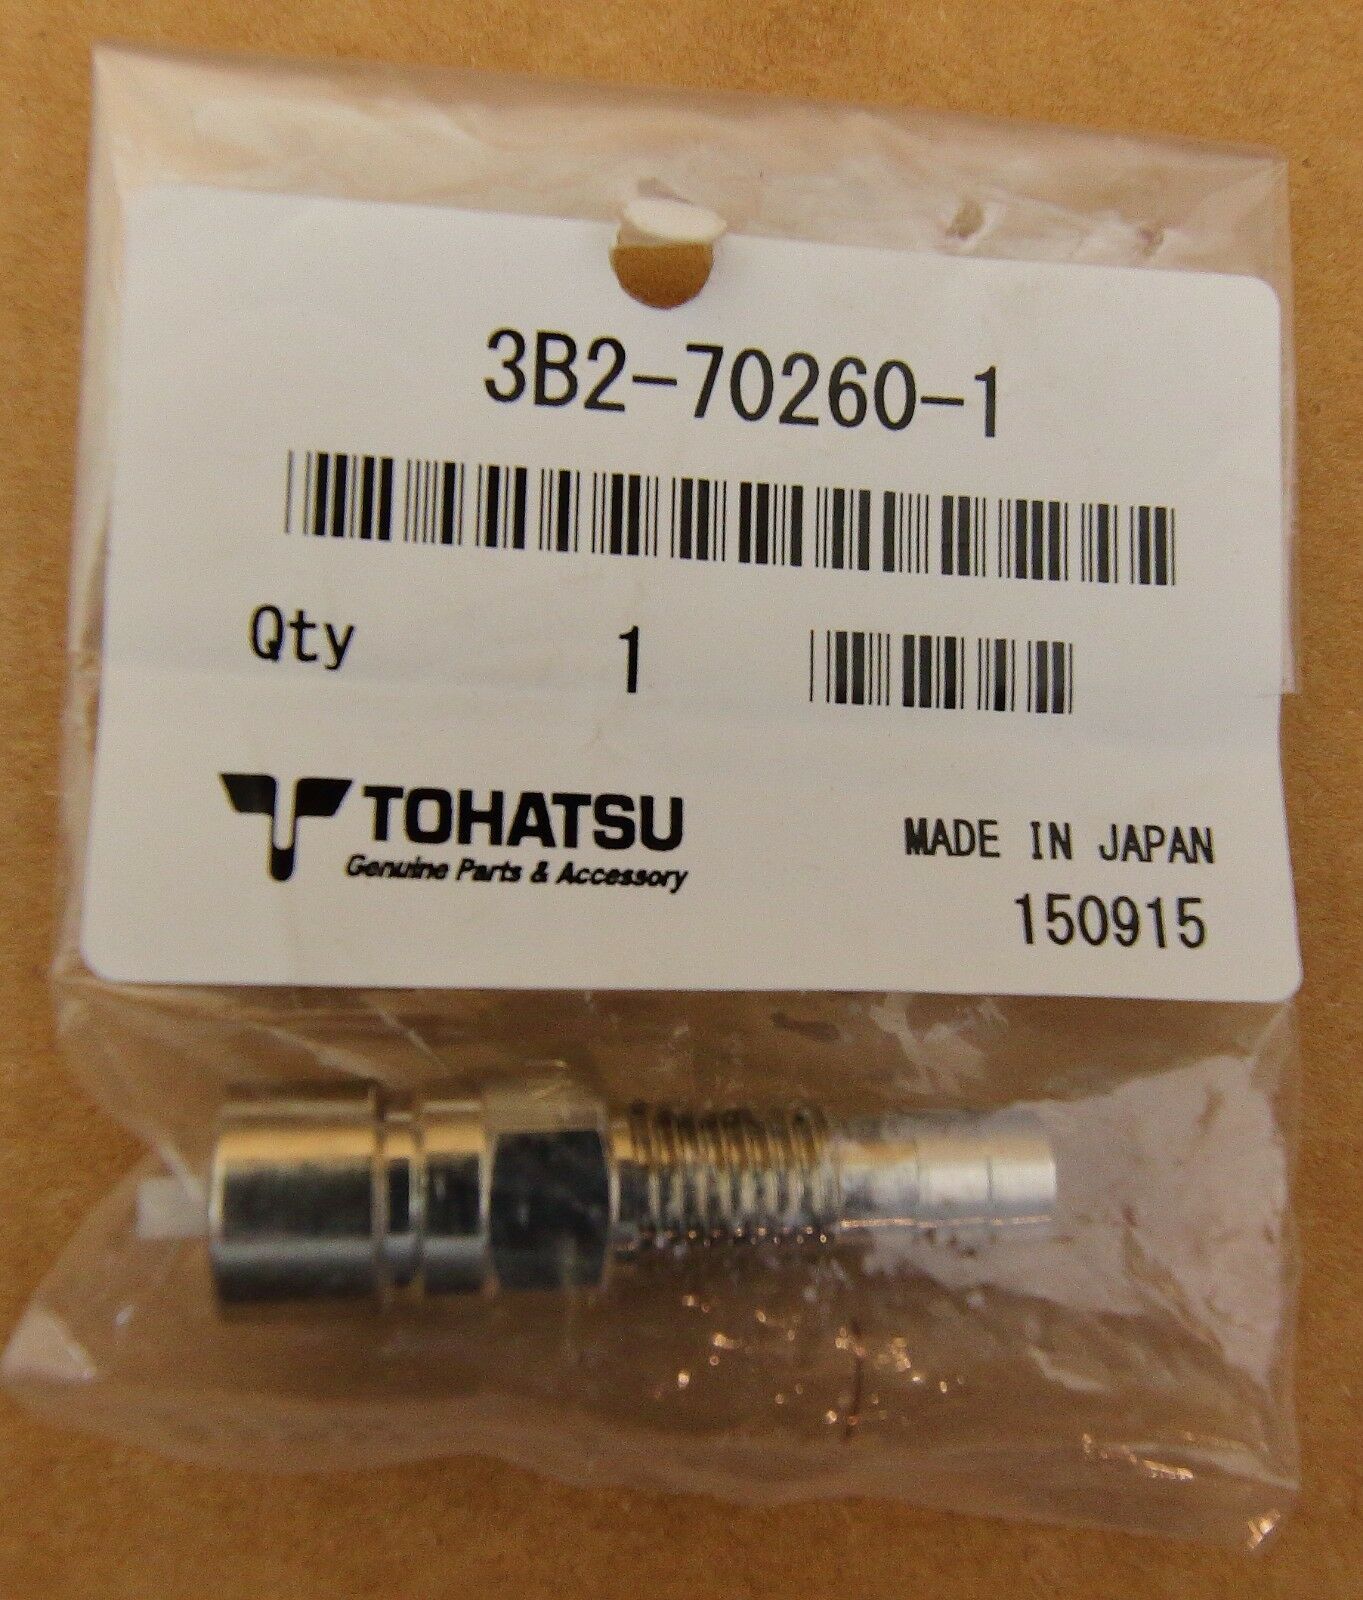 Primary image for TOHATSU NISSAN FUEL CONNECTOR ENGINE SIDE 5 - 90 HP 2-STROKE P/N 3B2-70260-1 